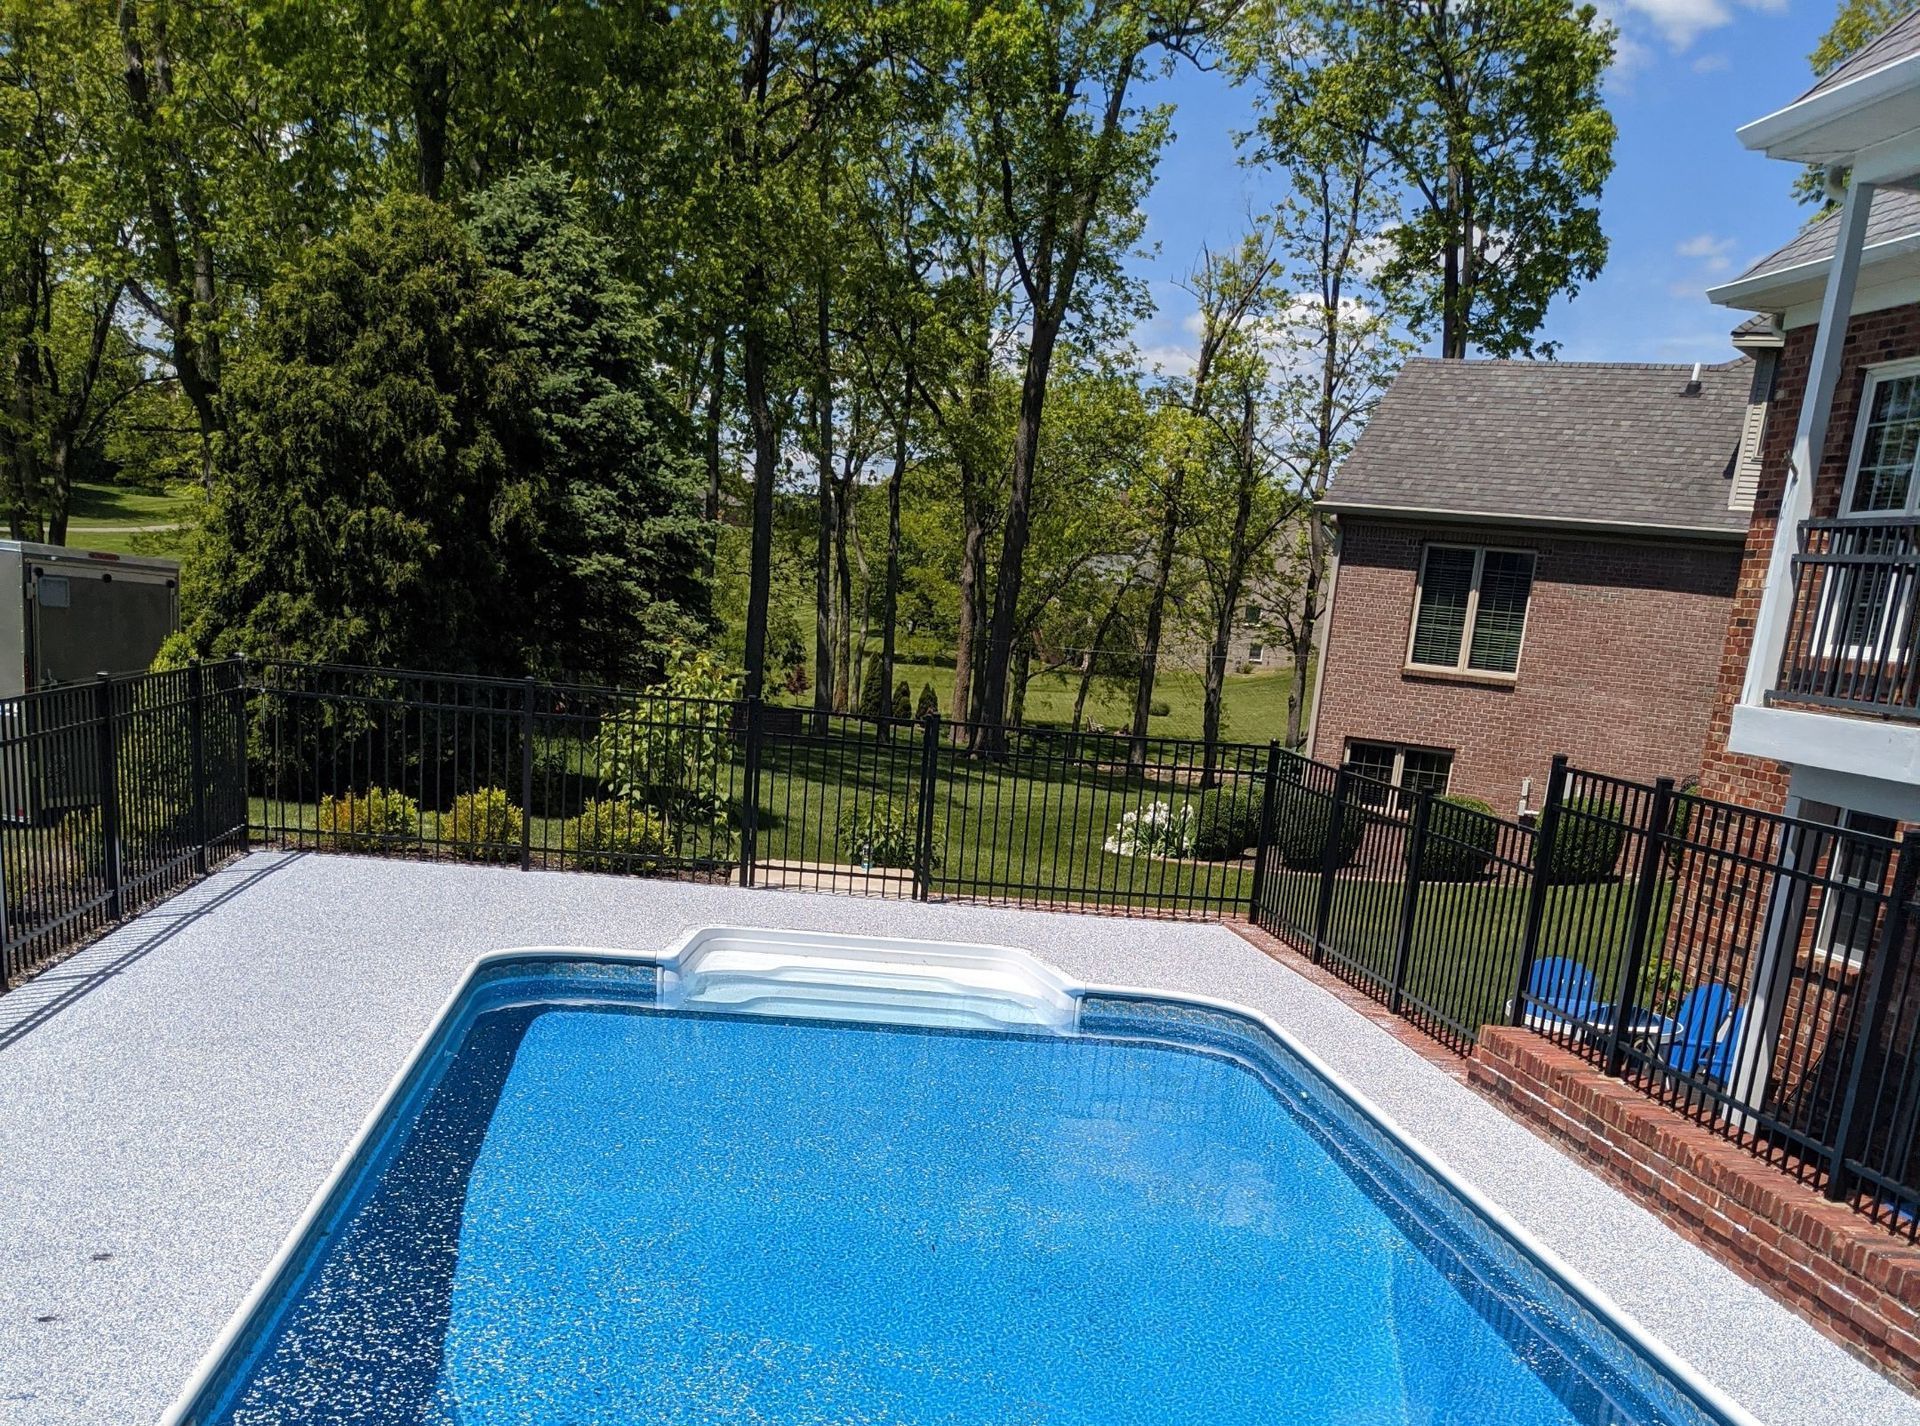 Provide Durability and Safety to Your Pool Deck